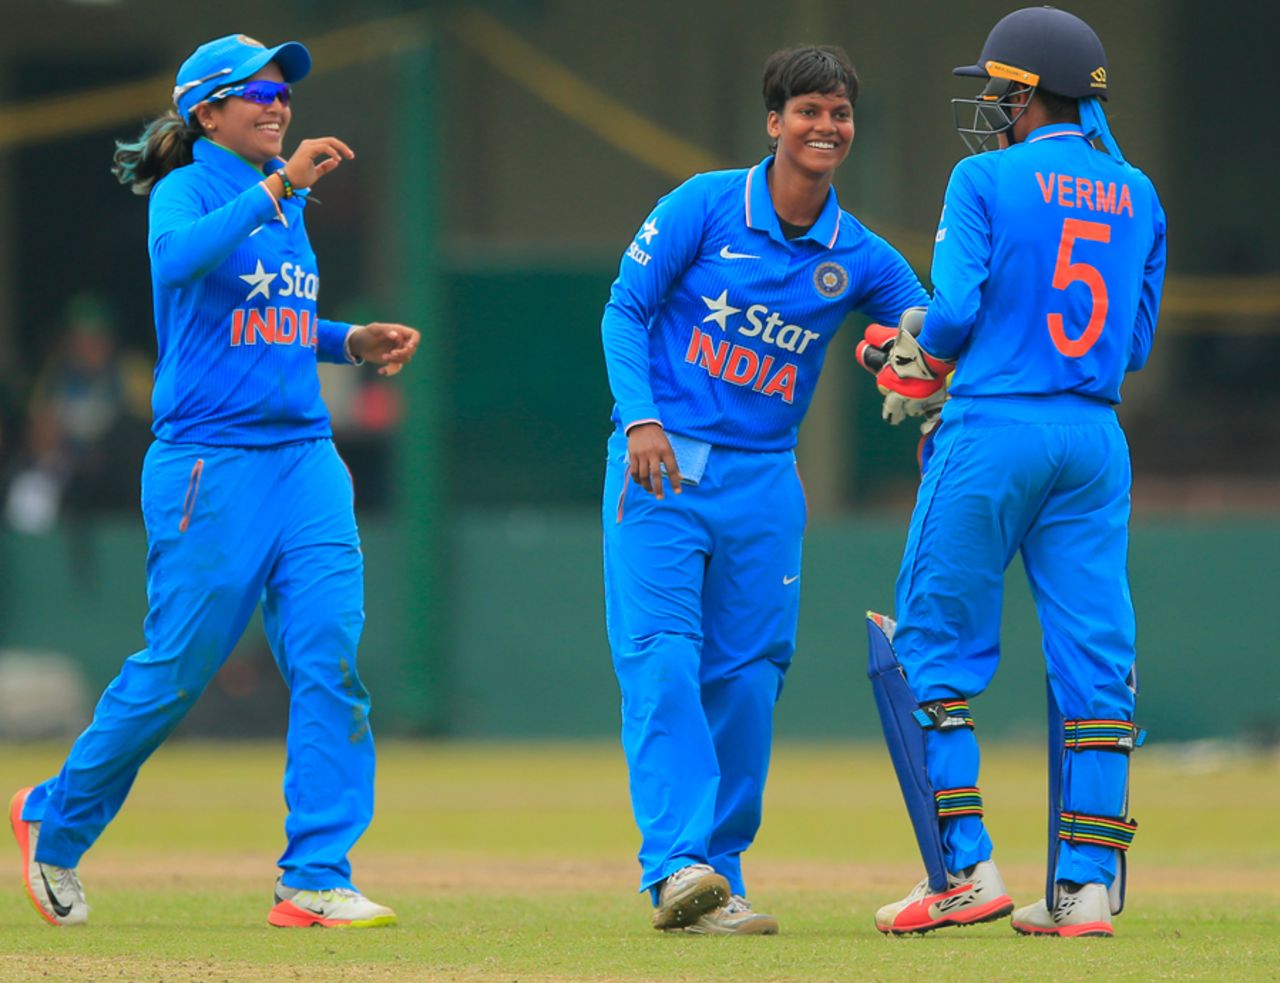 Deepti Sharma celebrates the wicket of Bismah Maroof with her team-mates, India Women v Pakistan Women, ICC Women's World Cup Qualifier, Colombo, February 19, 2017